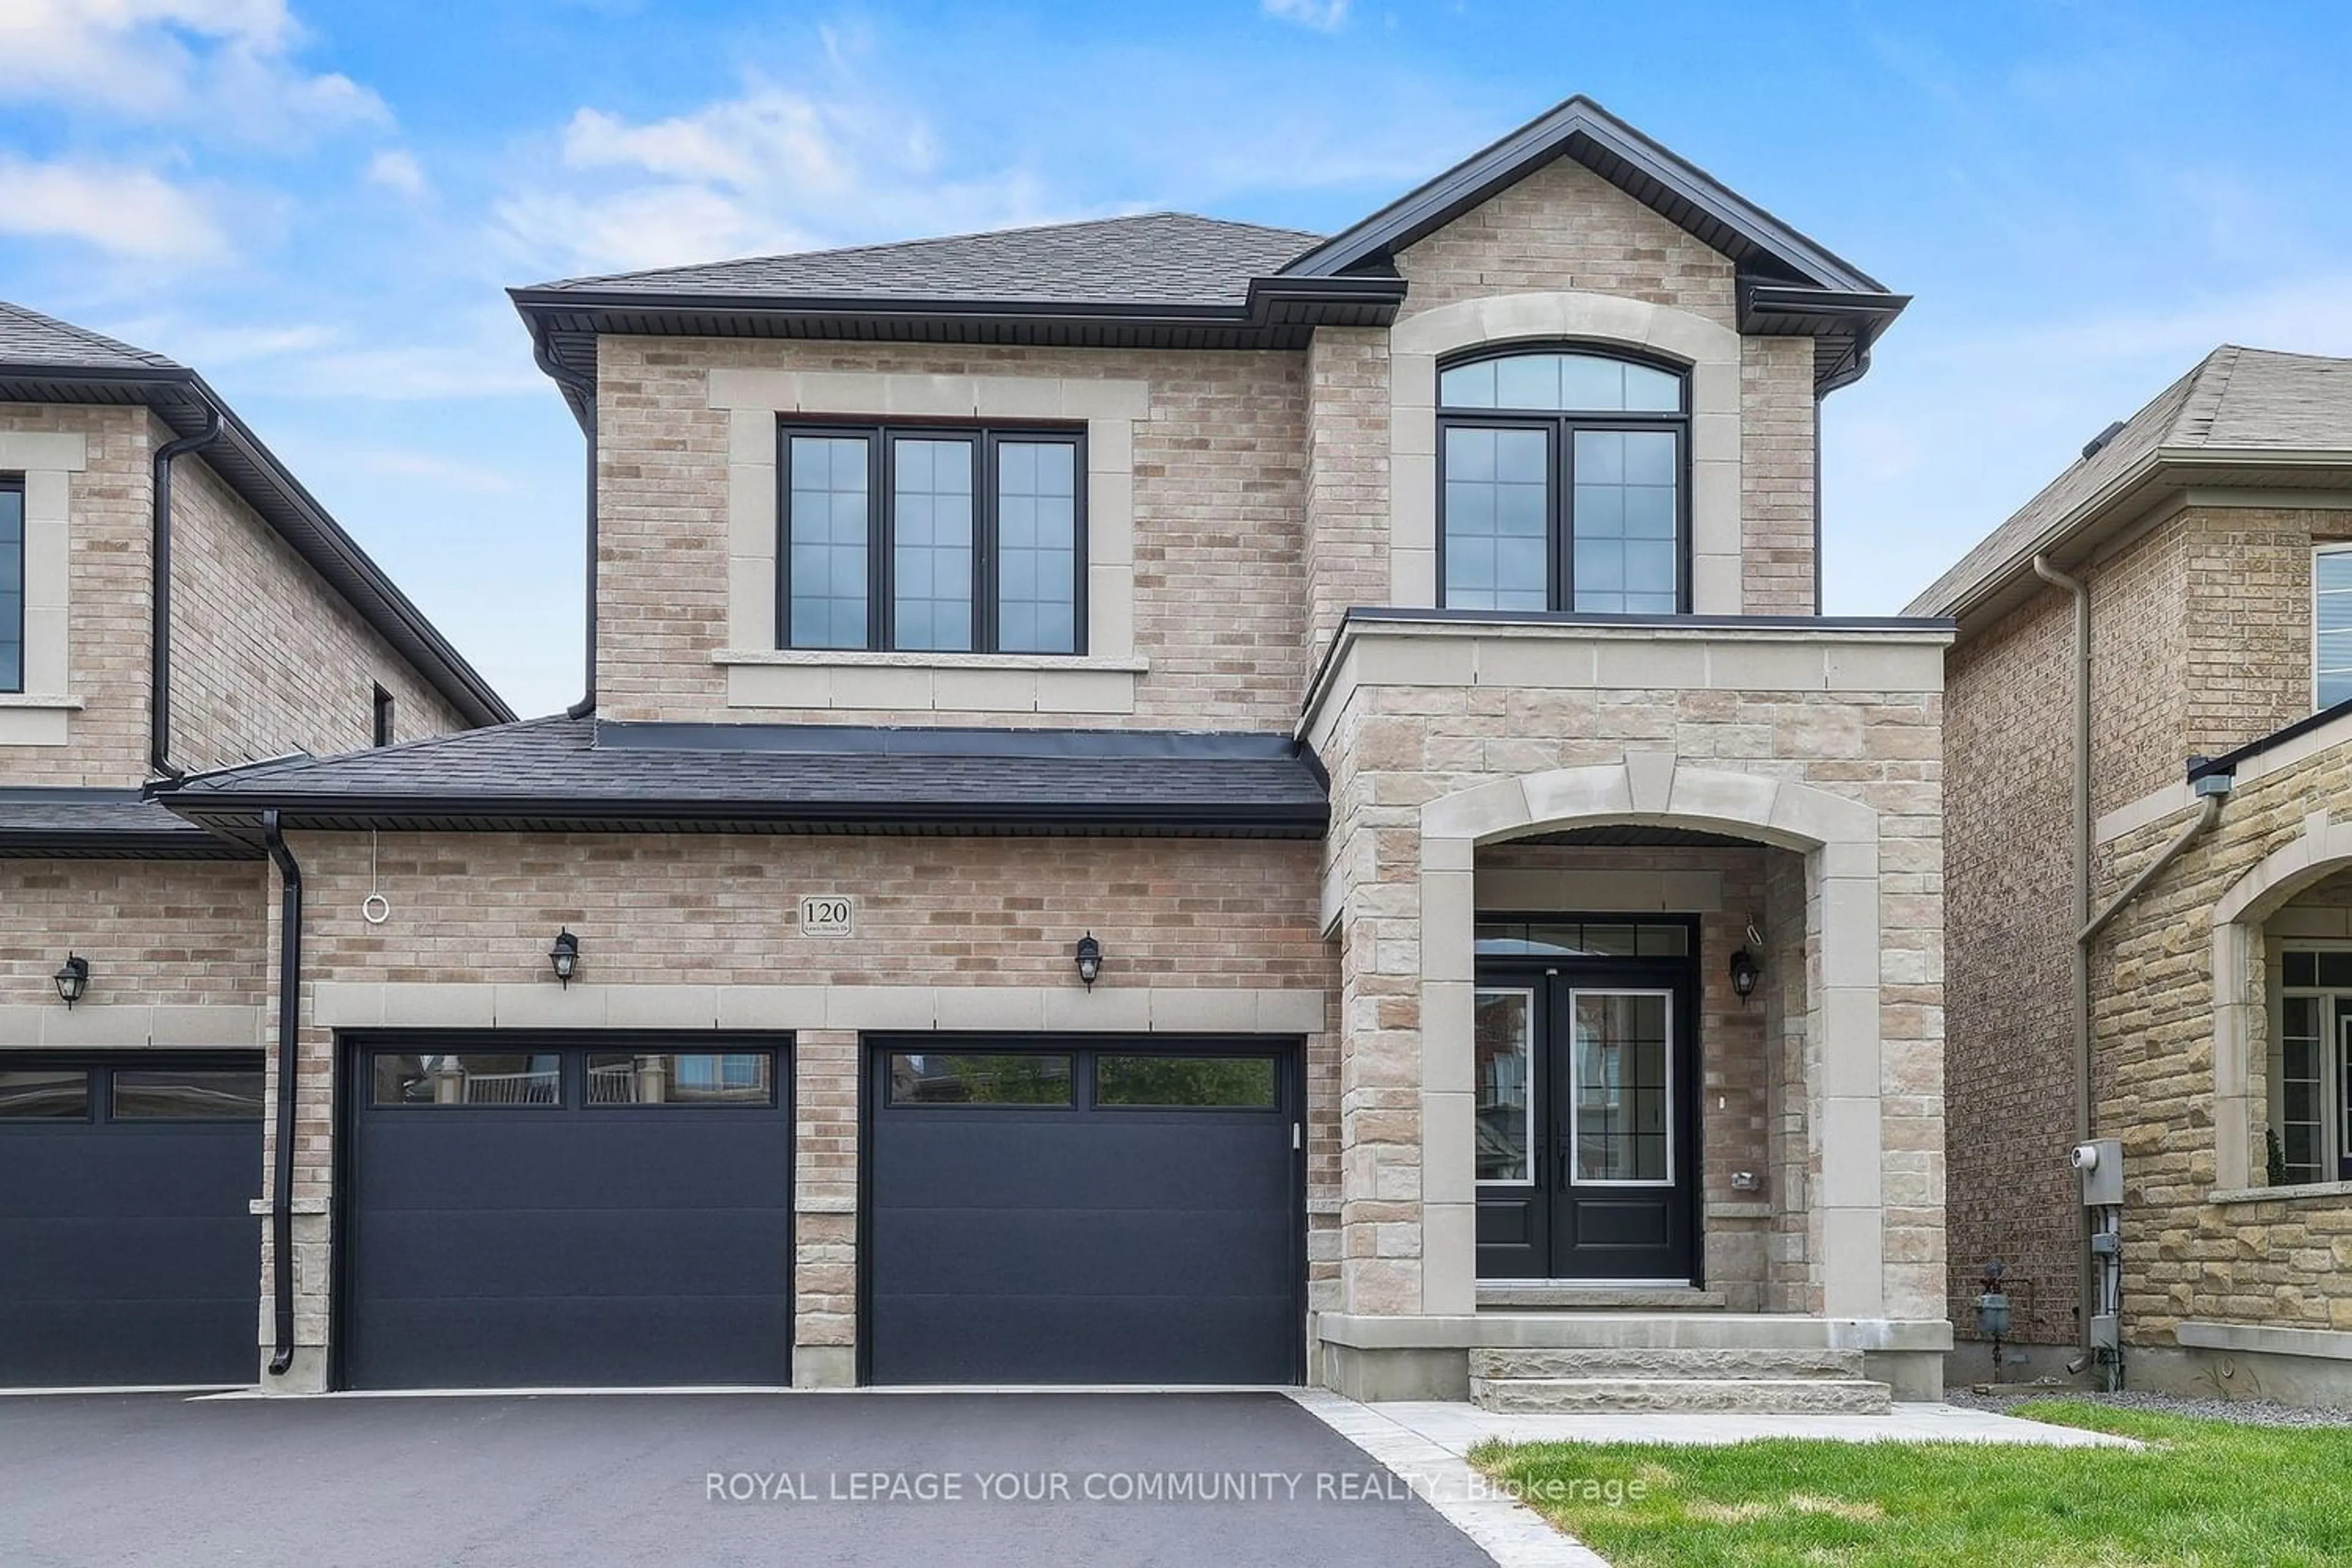 Home with brick exterior material for 120 Lewis Honey Dr, Aurora Ontario L4G 0J3